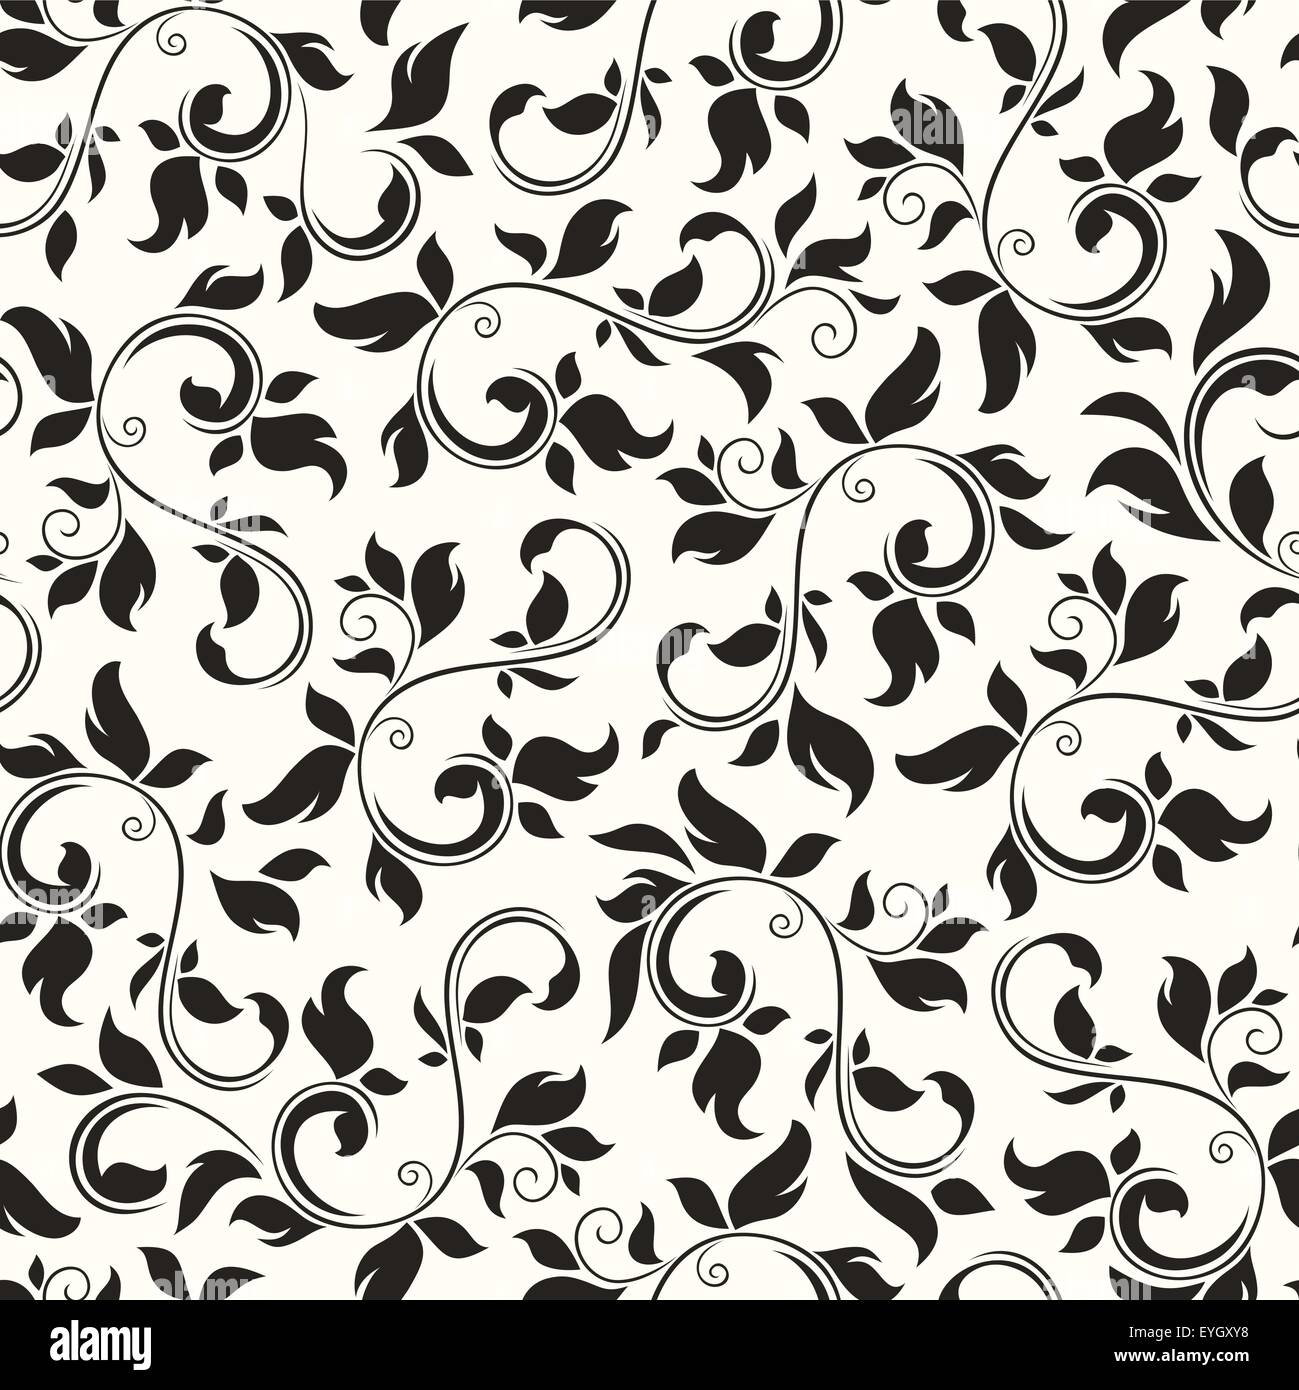 Seamless Black And White Floral Pattern Vector Illustration Stock Vector Image Art Alamy